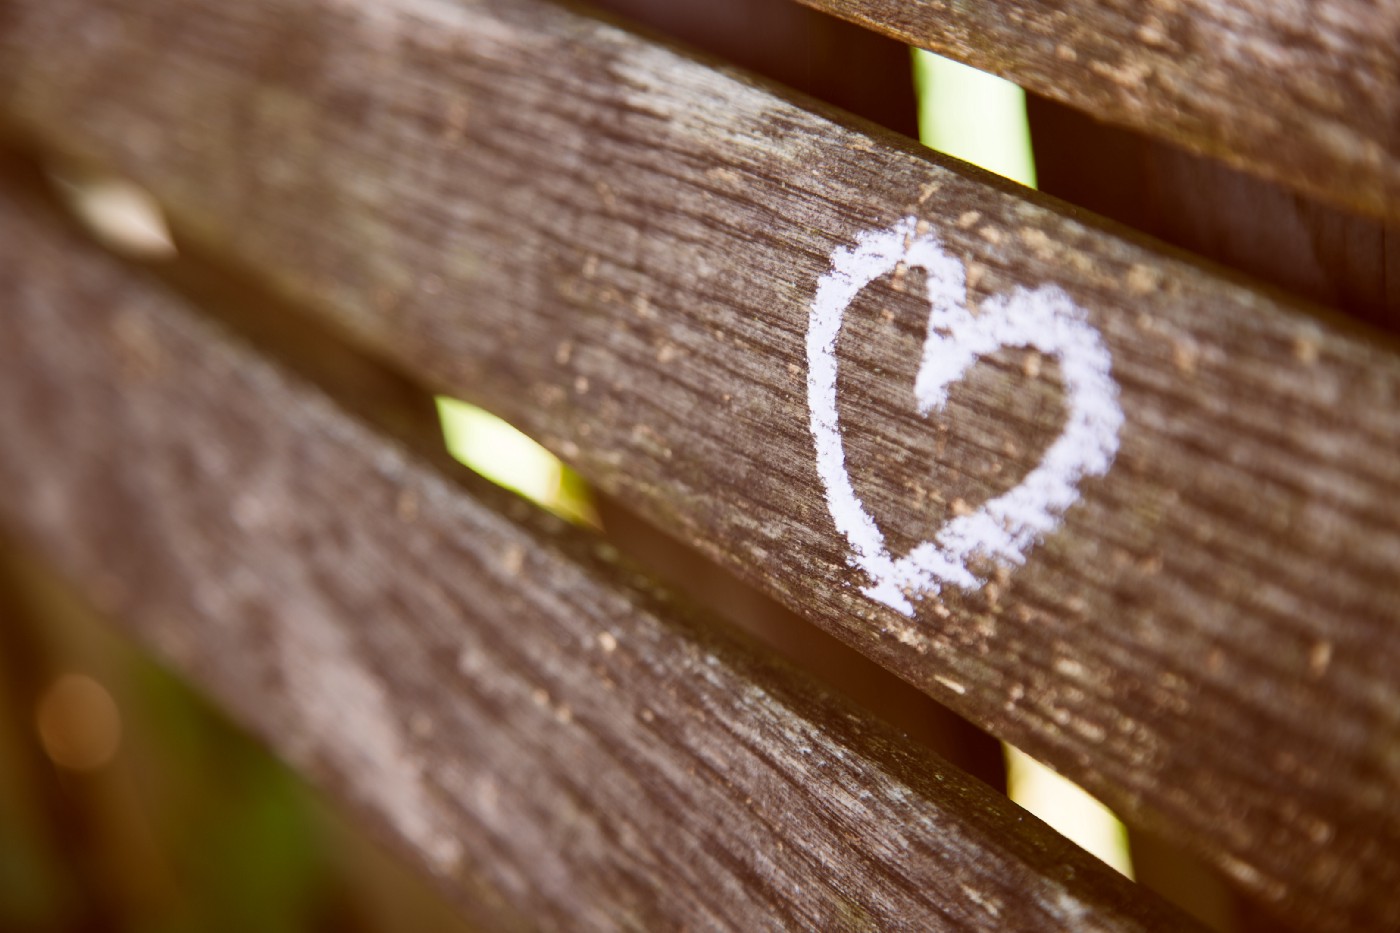 Post-divorce Love Awaits: How to find your soulmate